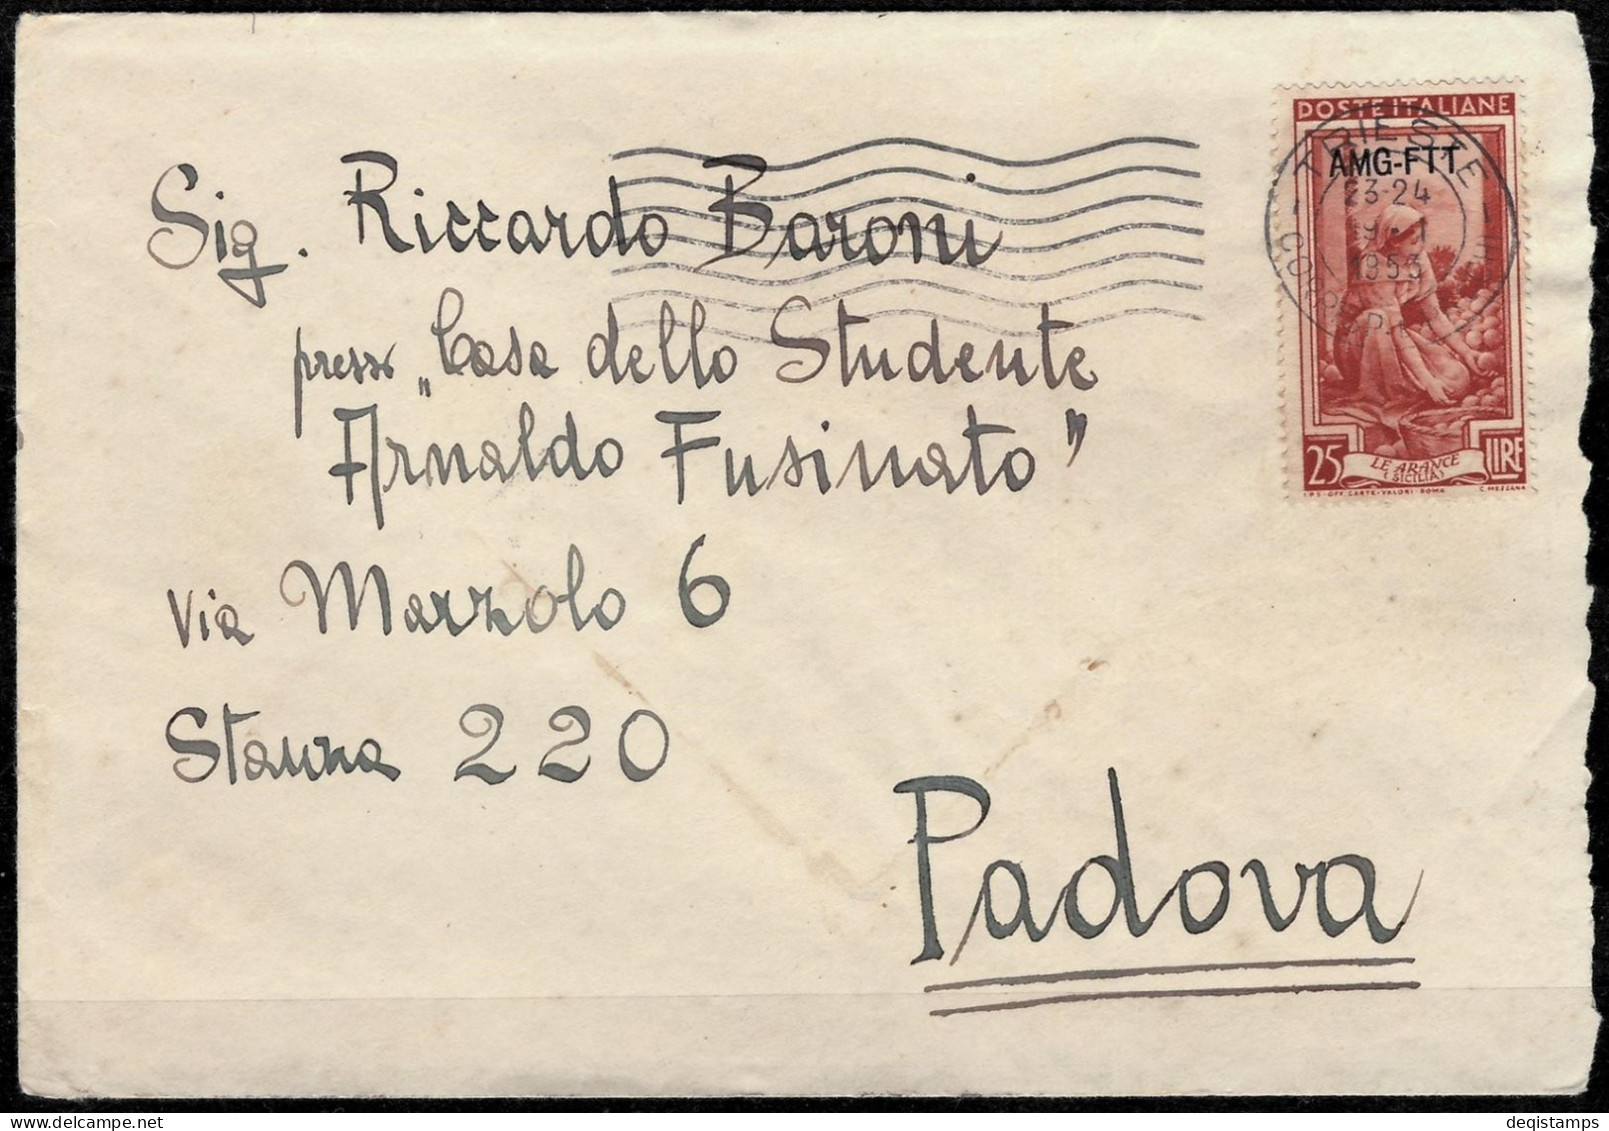 Italy / Trieste A Year 1953  AMG - FTT  Cover - Occ. Yougoslave: Trieste